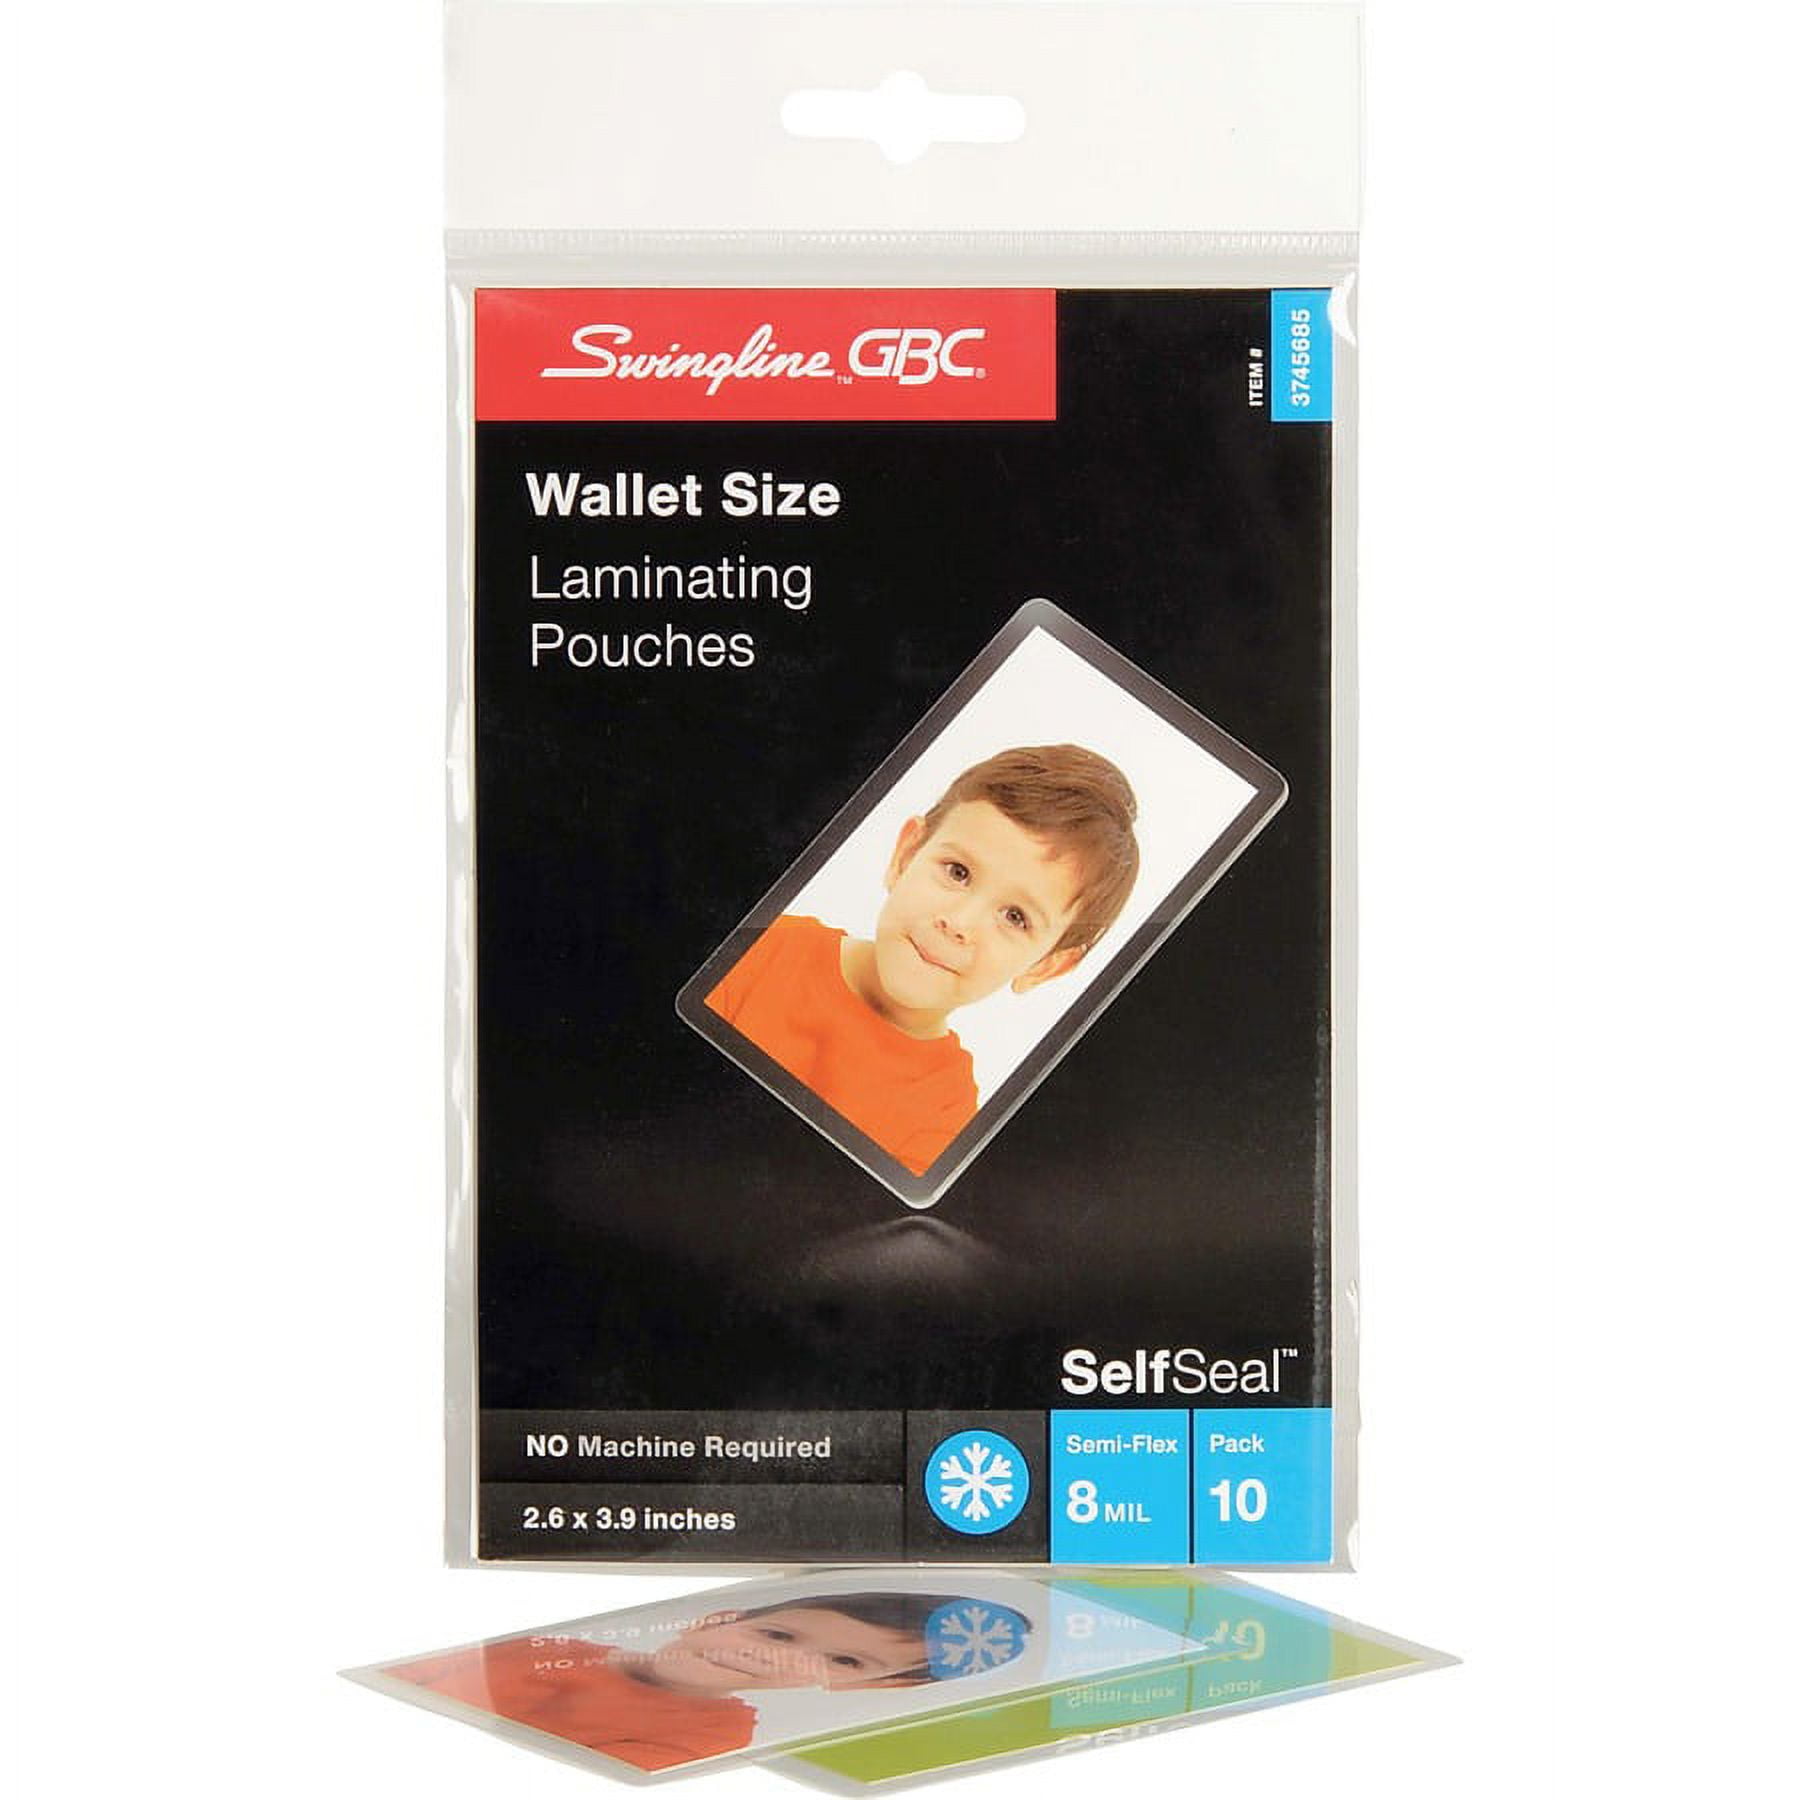 Pen + Gear Thermal Laminating Pouches, 9 x 11.5, Material: PET